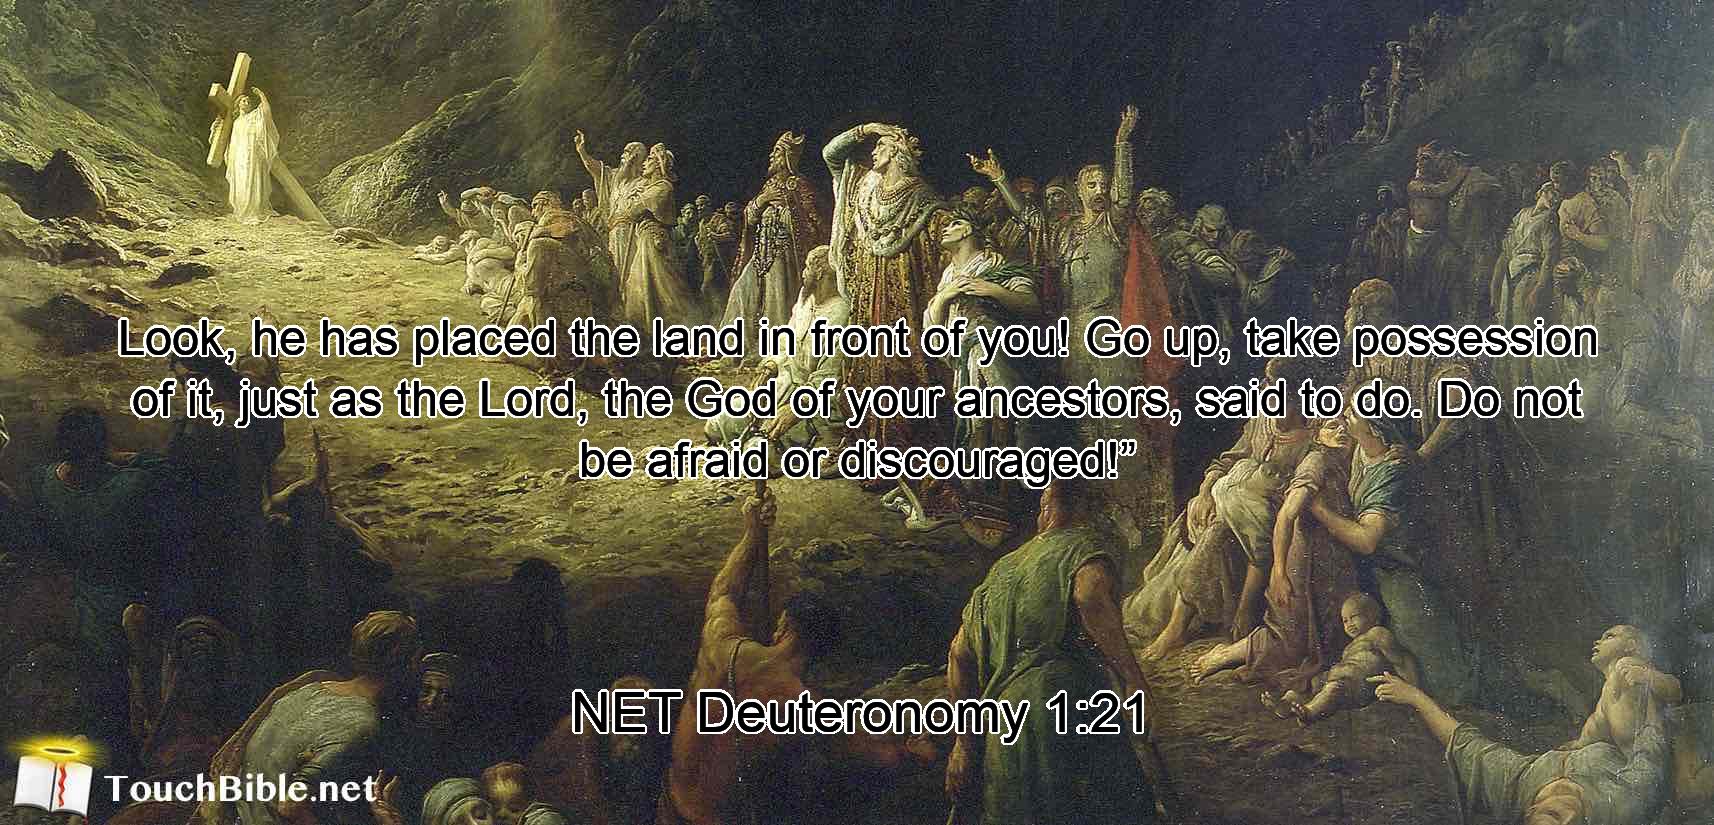 Look, he  has placed the land in front of you!  Go up, take possession of it, just as the Lord, the God of your ancestors, said to do. Do not be afraid or discouraged!”